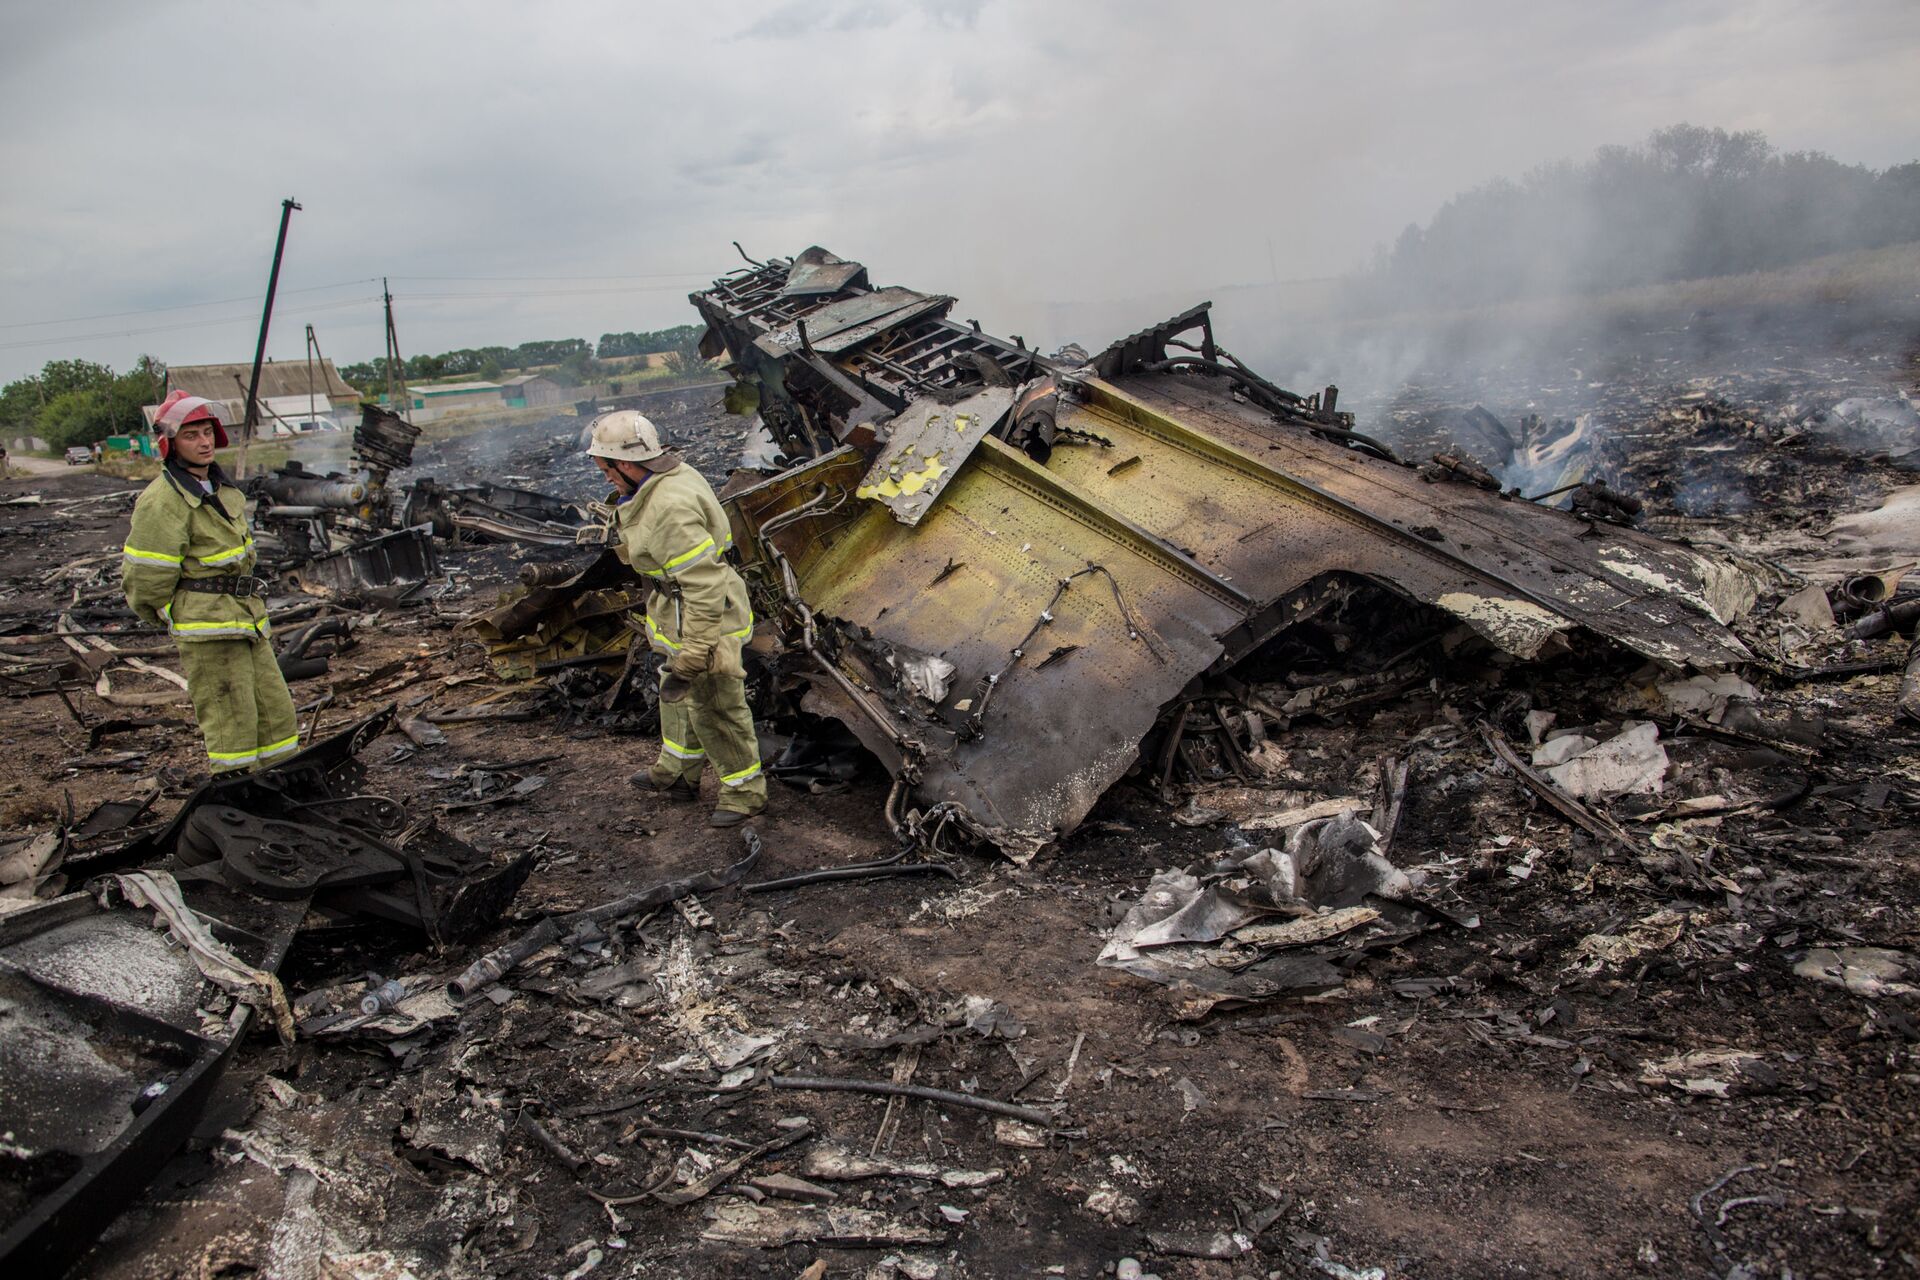 Rescuers seen at the site of the MH17 plane crash in Ukraine. File photo  - Sputnik International, 1920, 20.12.2021